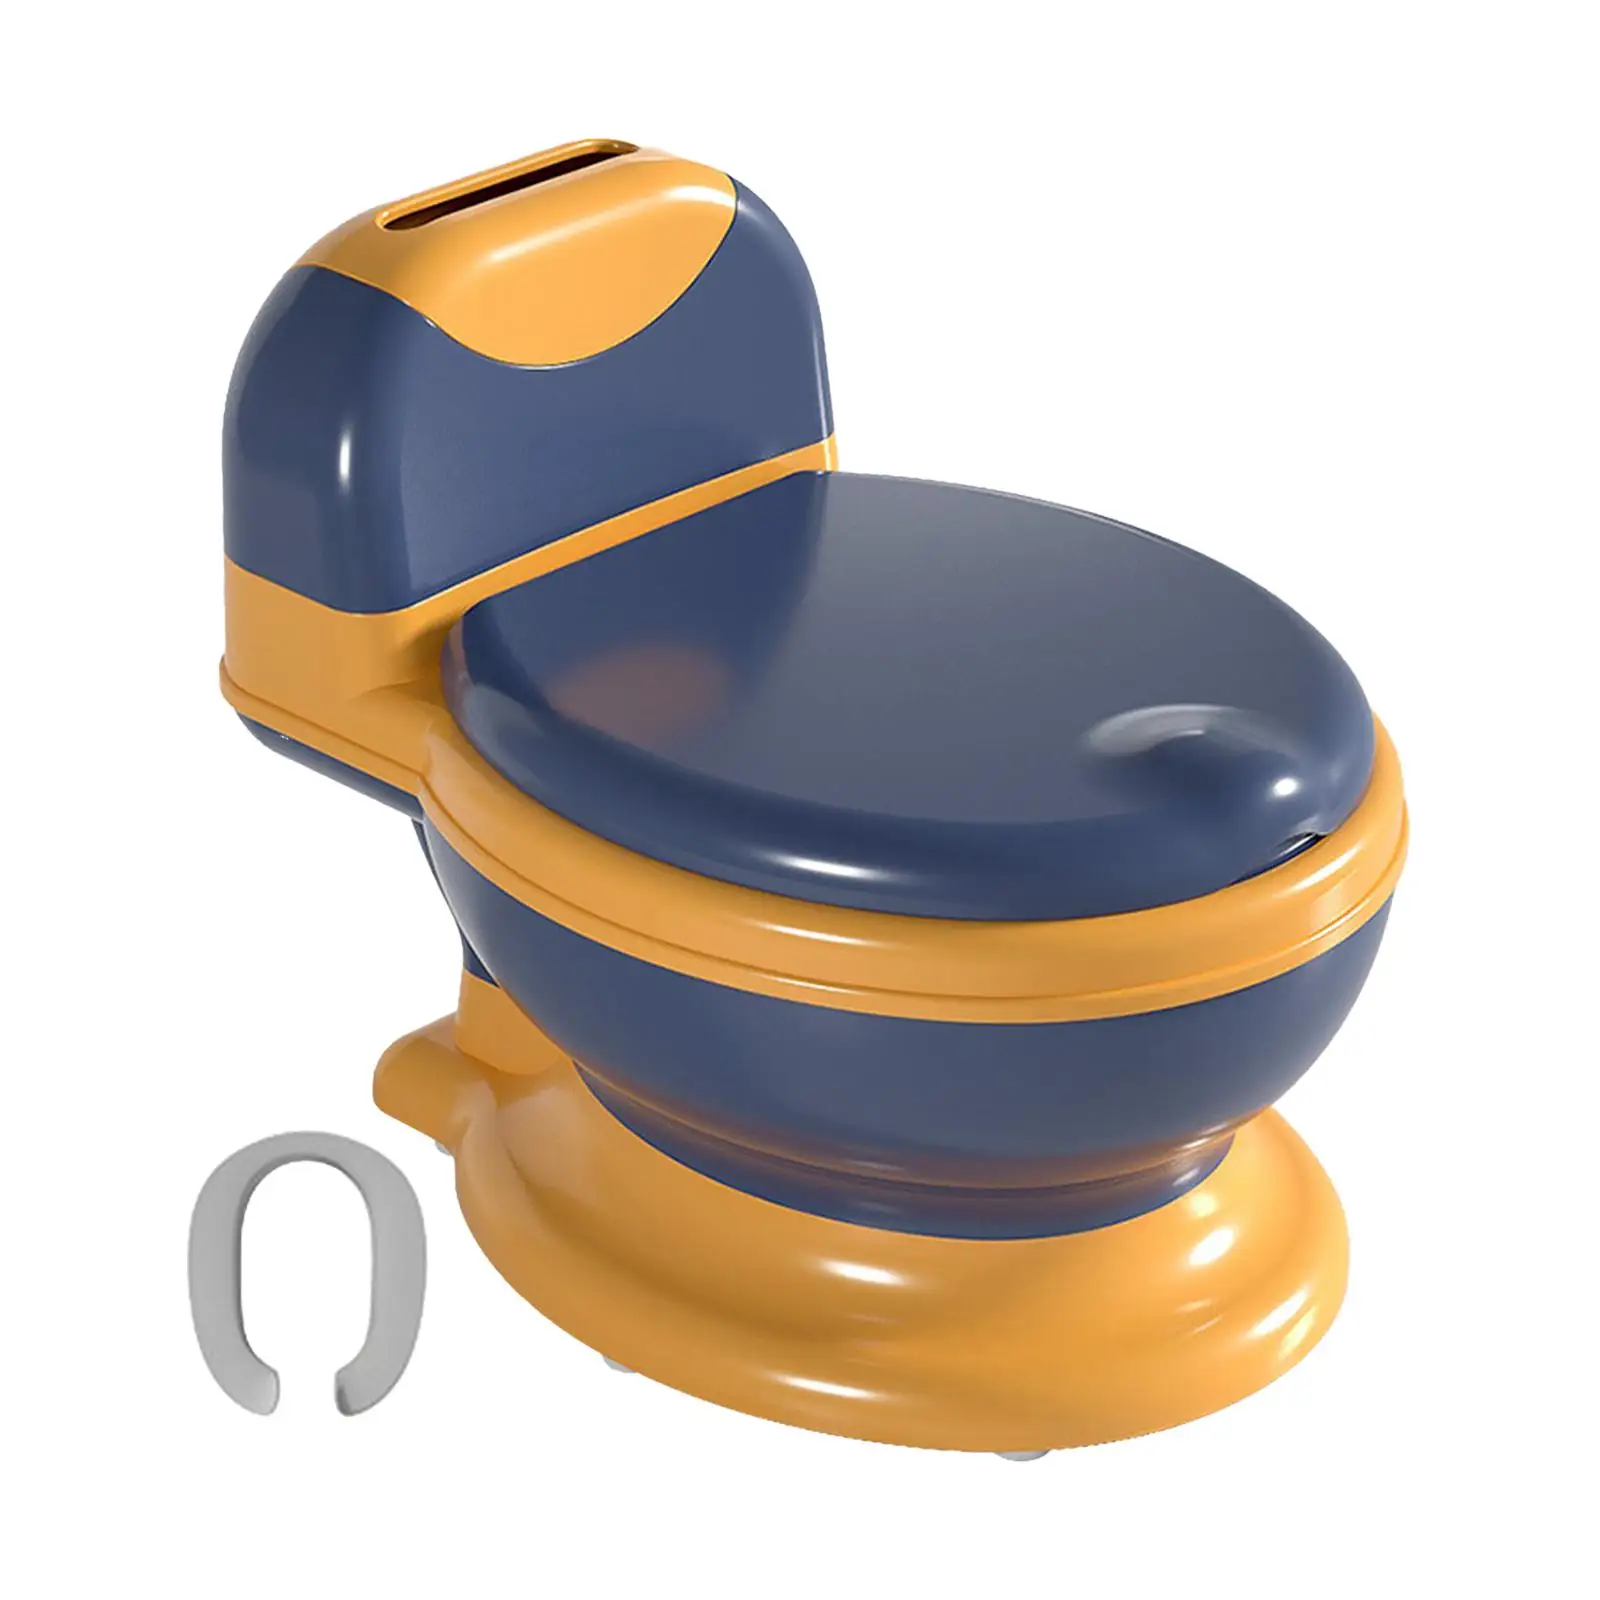 Potty Train Toilet Portable Toilet Training Seat Potty Seat Detachable Toddlers Potty Chair for Children Boys Girls Kids Baby